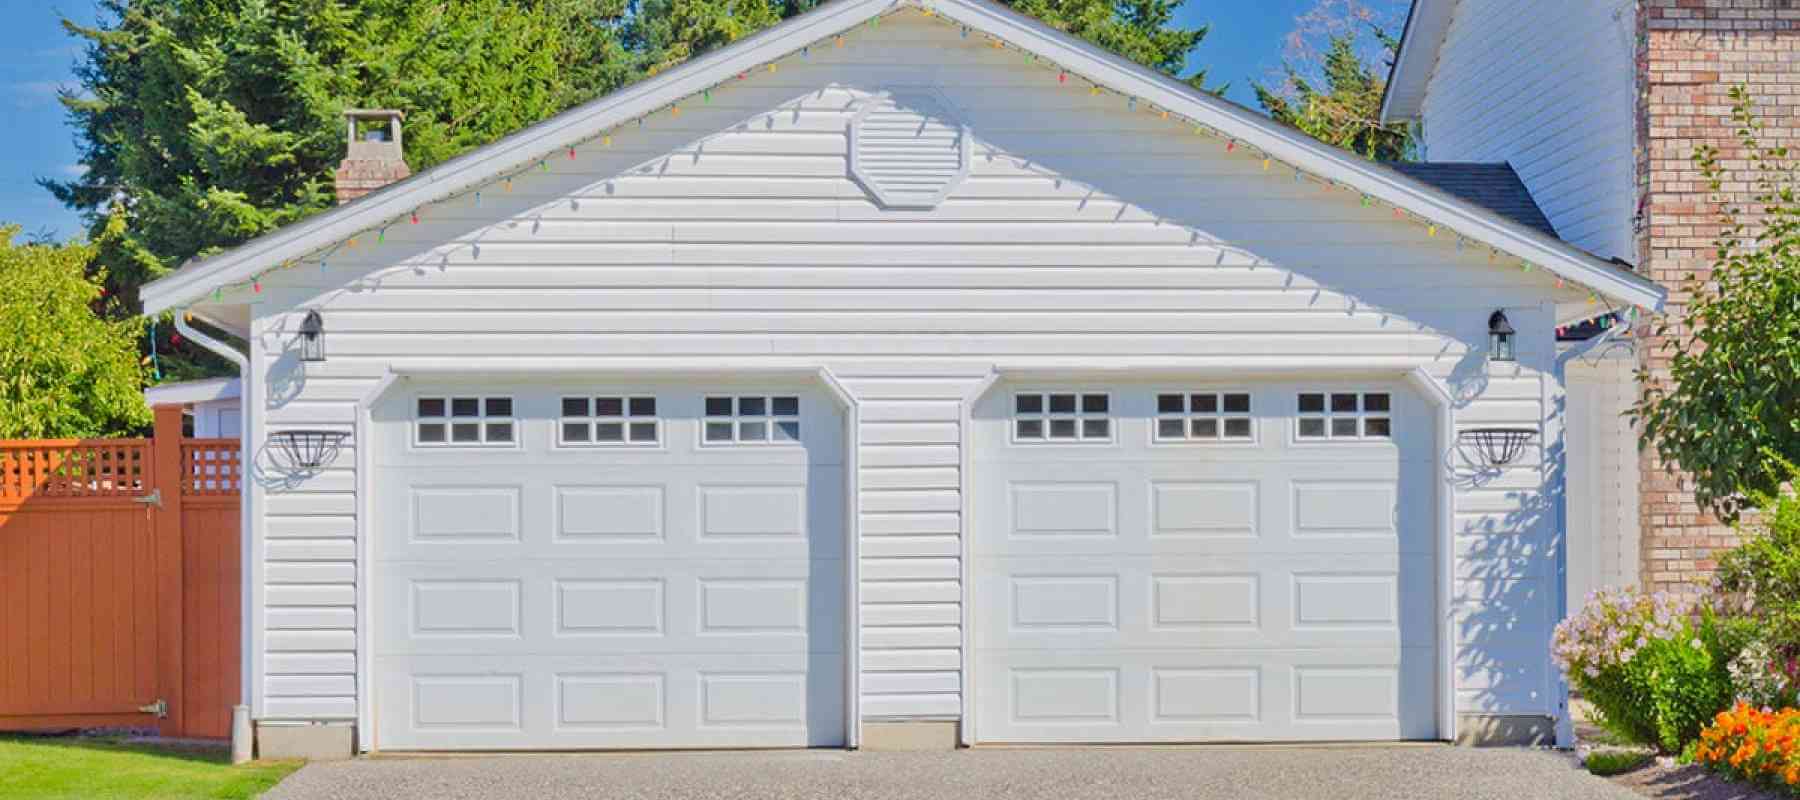 Cost to Build a Garage